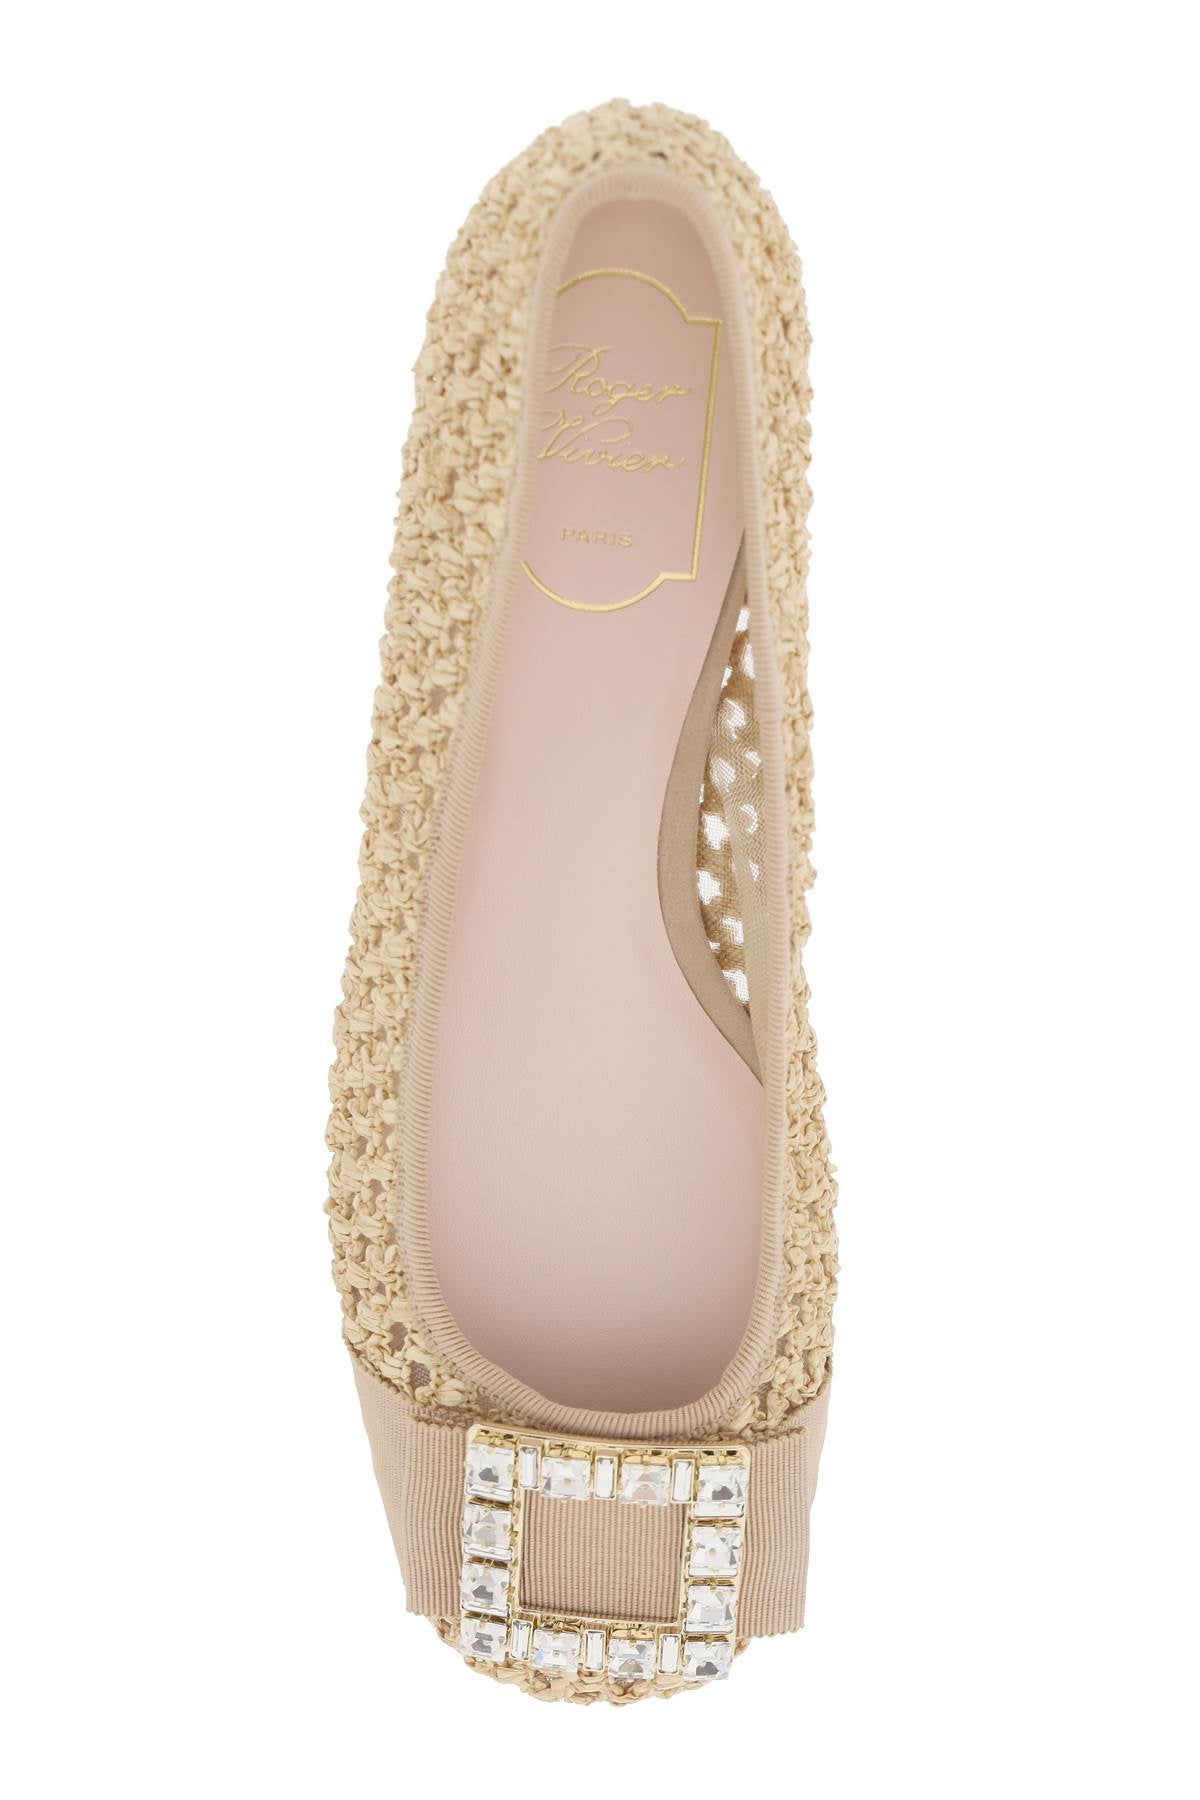 ROGER VIVIER Tan Tres Vivier Ballerinas with Crystal Buckle and Fabric Ribbon